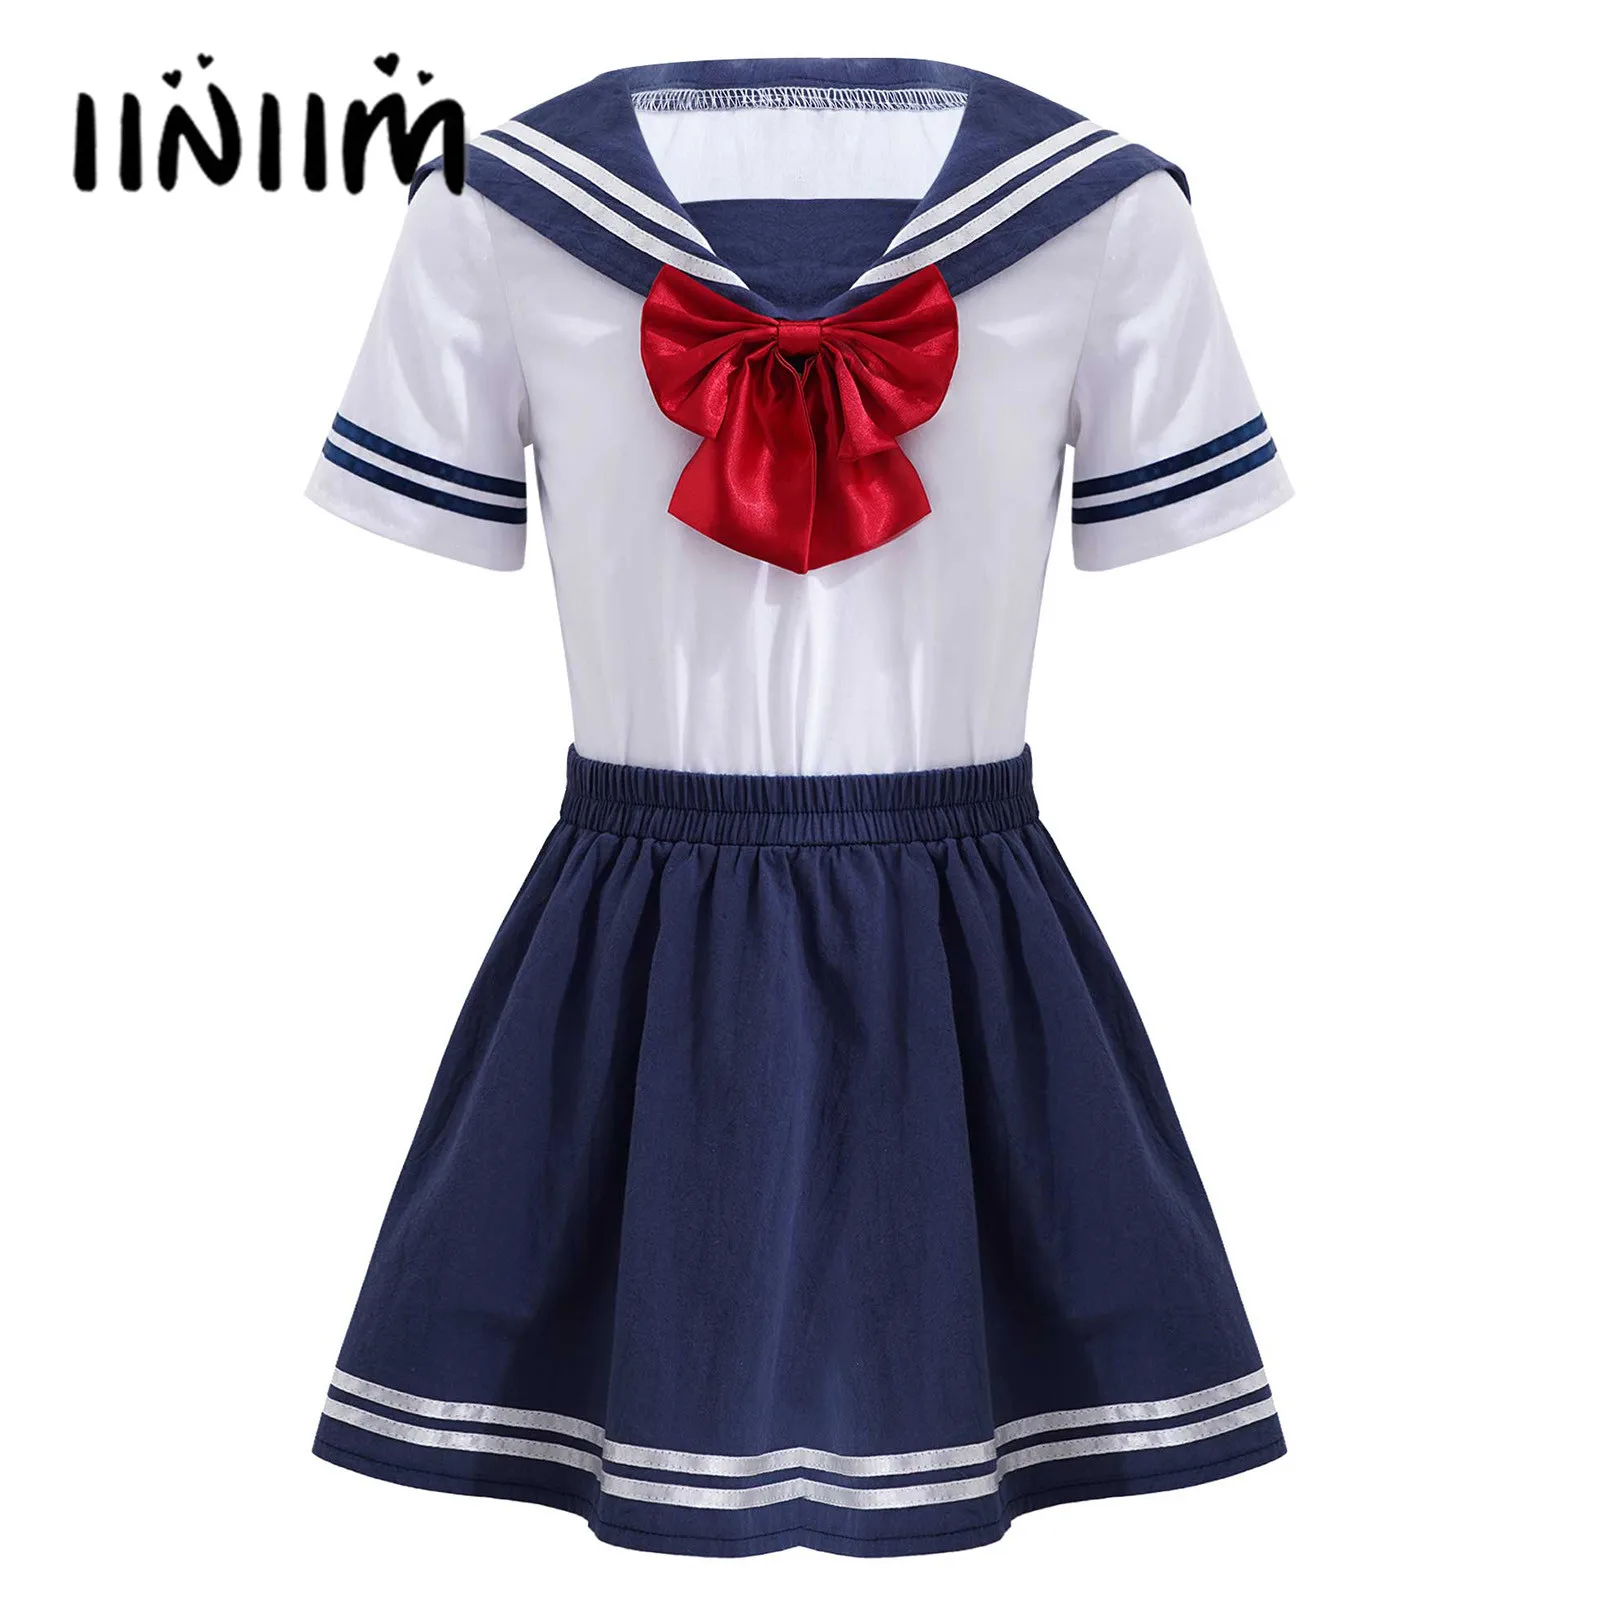 

Kids Girls School Uniform Clothes Set Short Sleeve Striped Patchwork Top with Removable Bowtie and Elastic Waistband Skirt